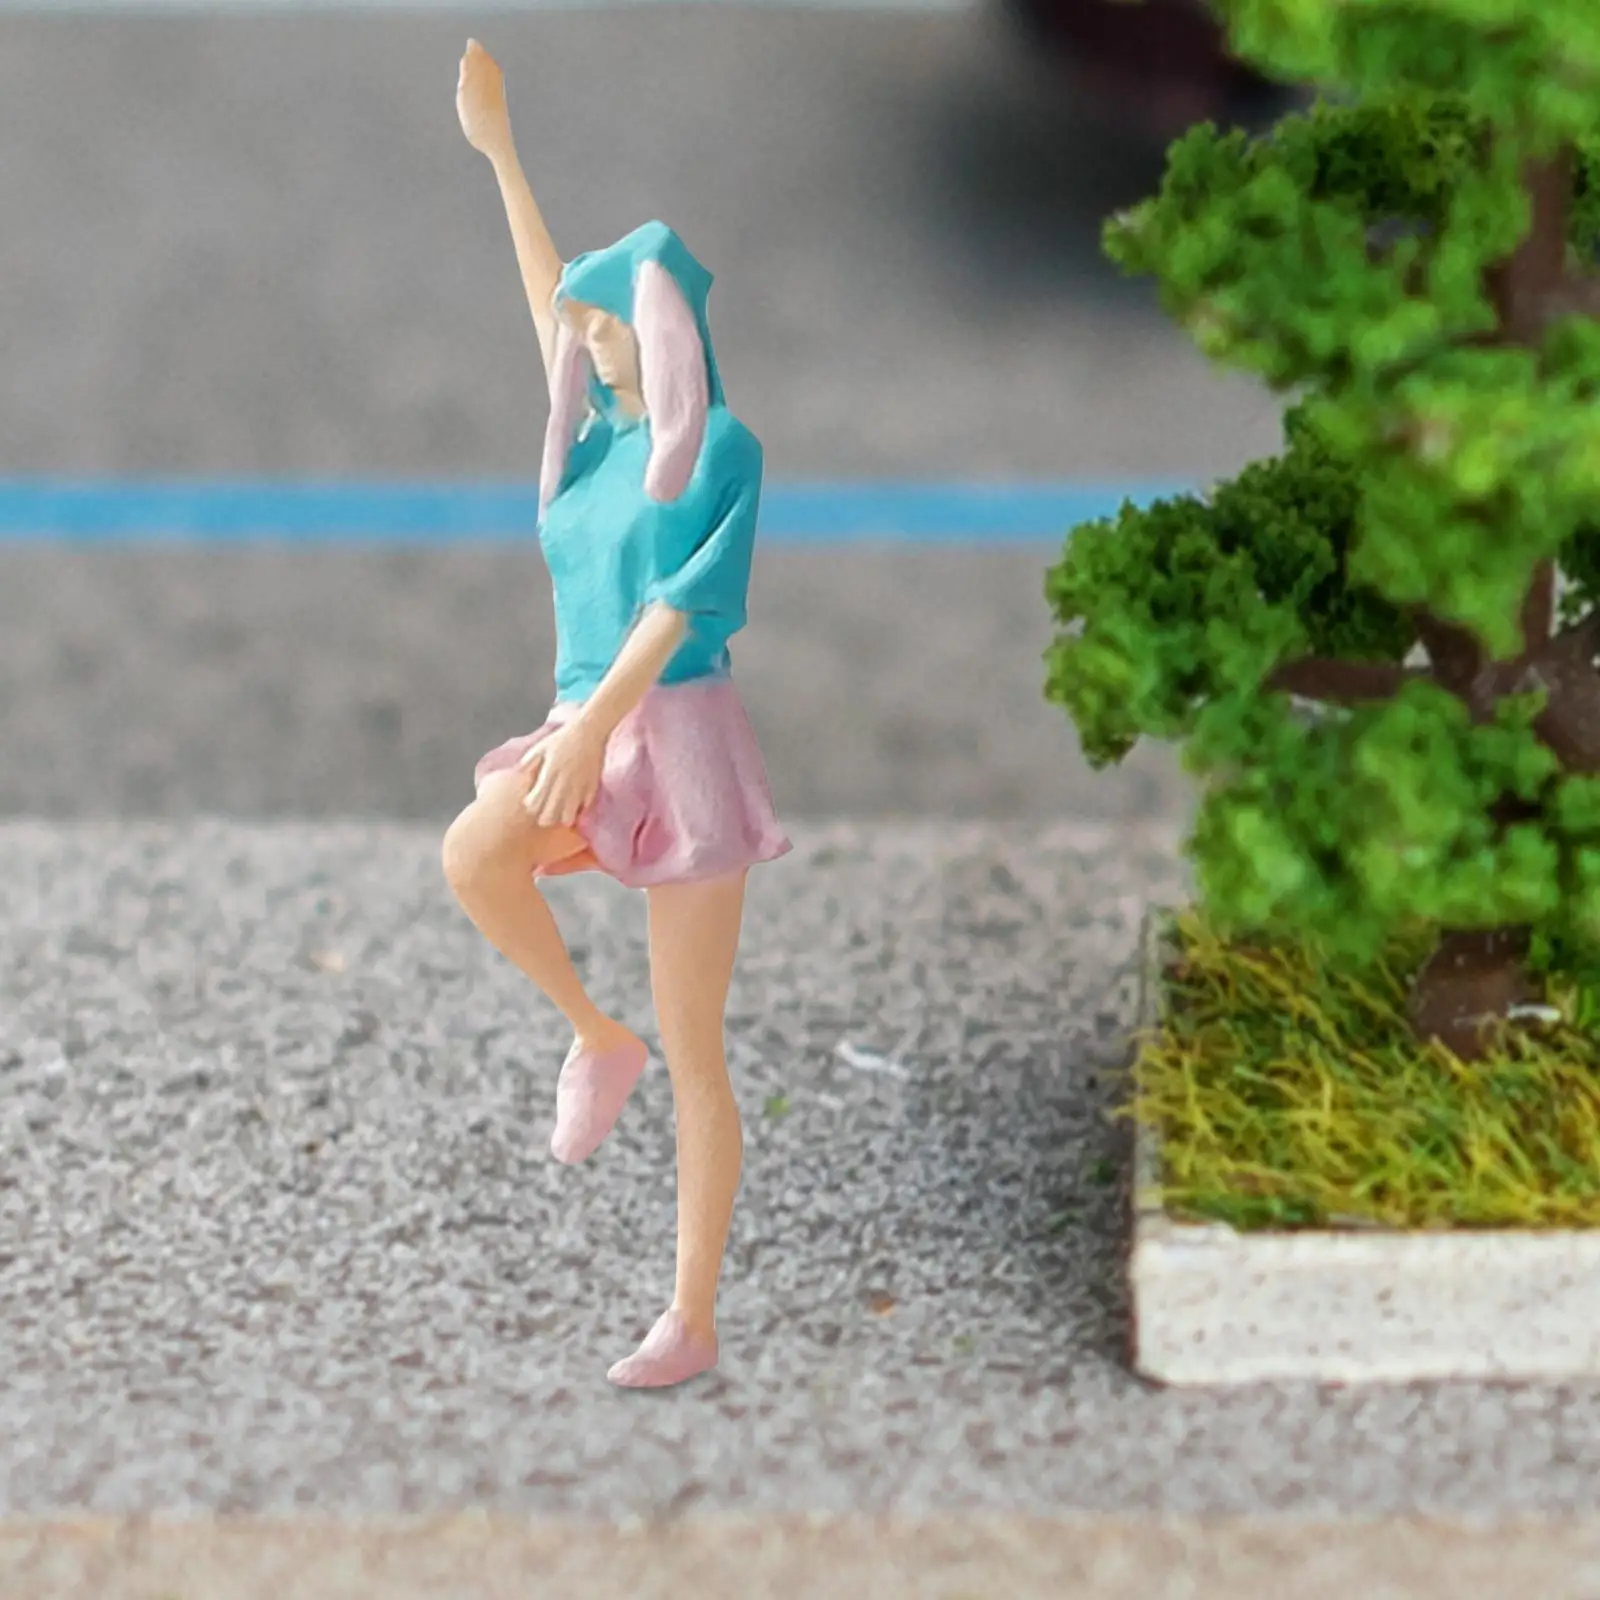 1/64 Diorama Figure Character Dancing Women for Model Building Kits DIY Projects Model Trains Collections Doll House Decoration